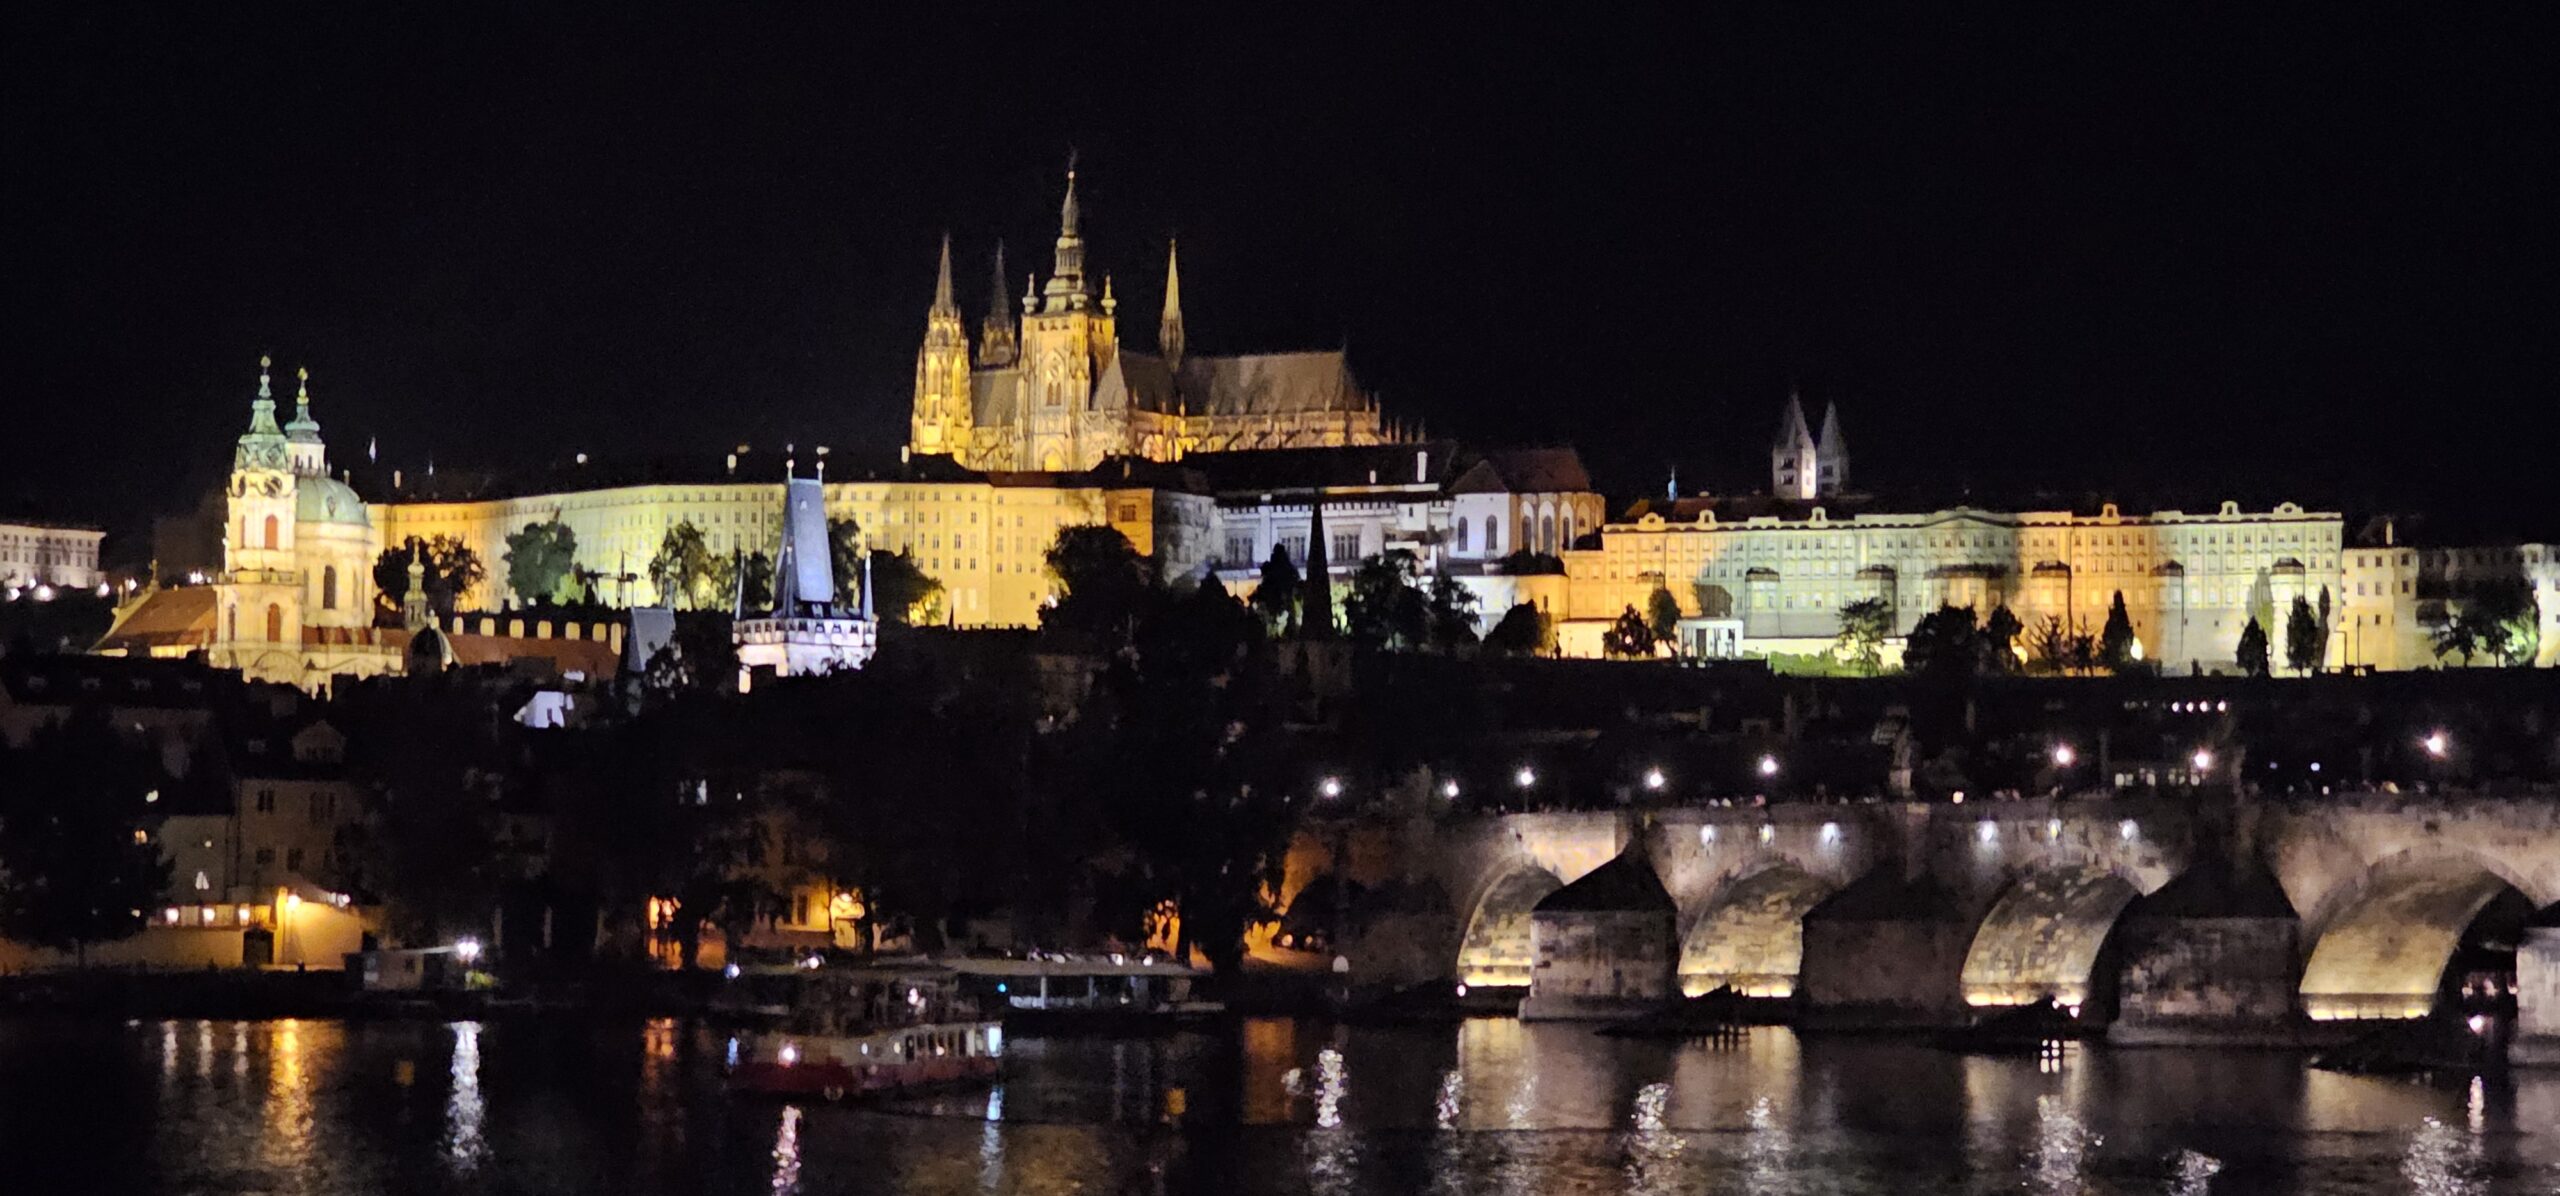 Hradčany Castle from a distance at night. Credit: 360onhistory.com